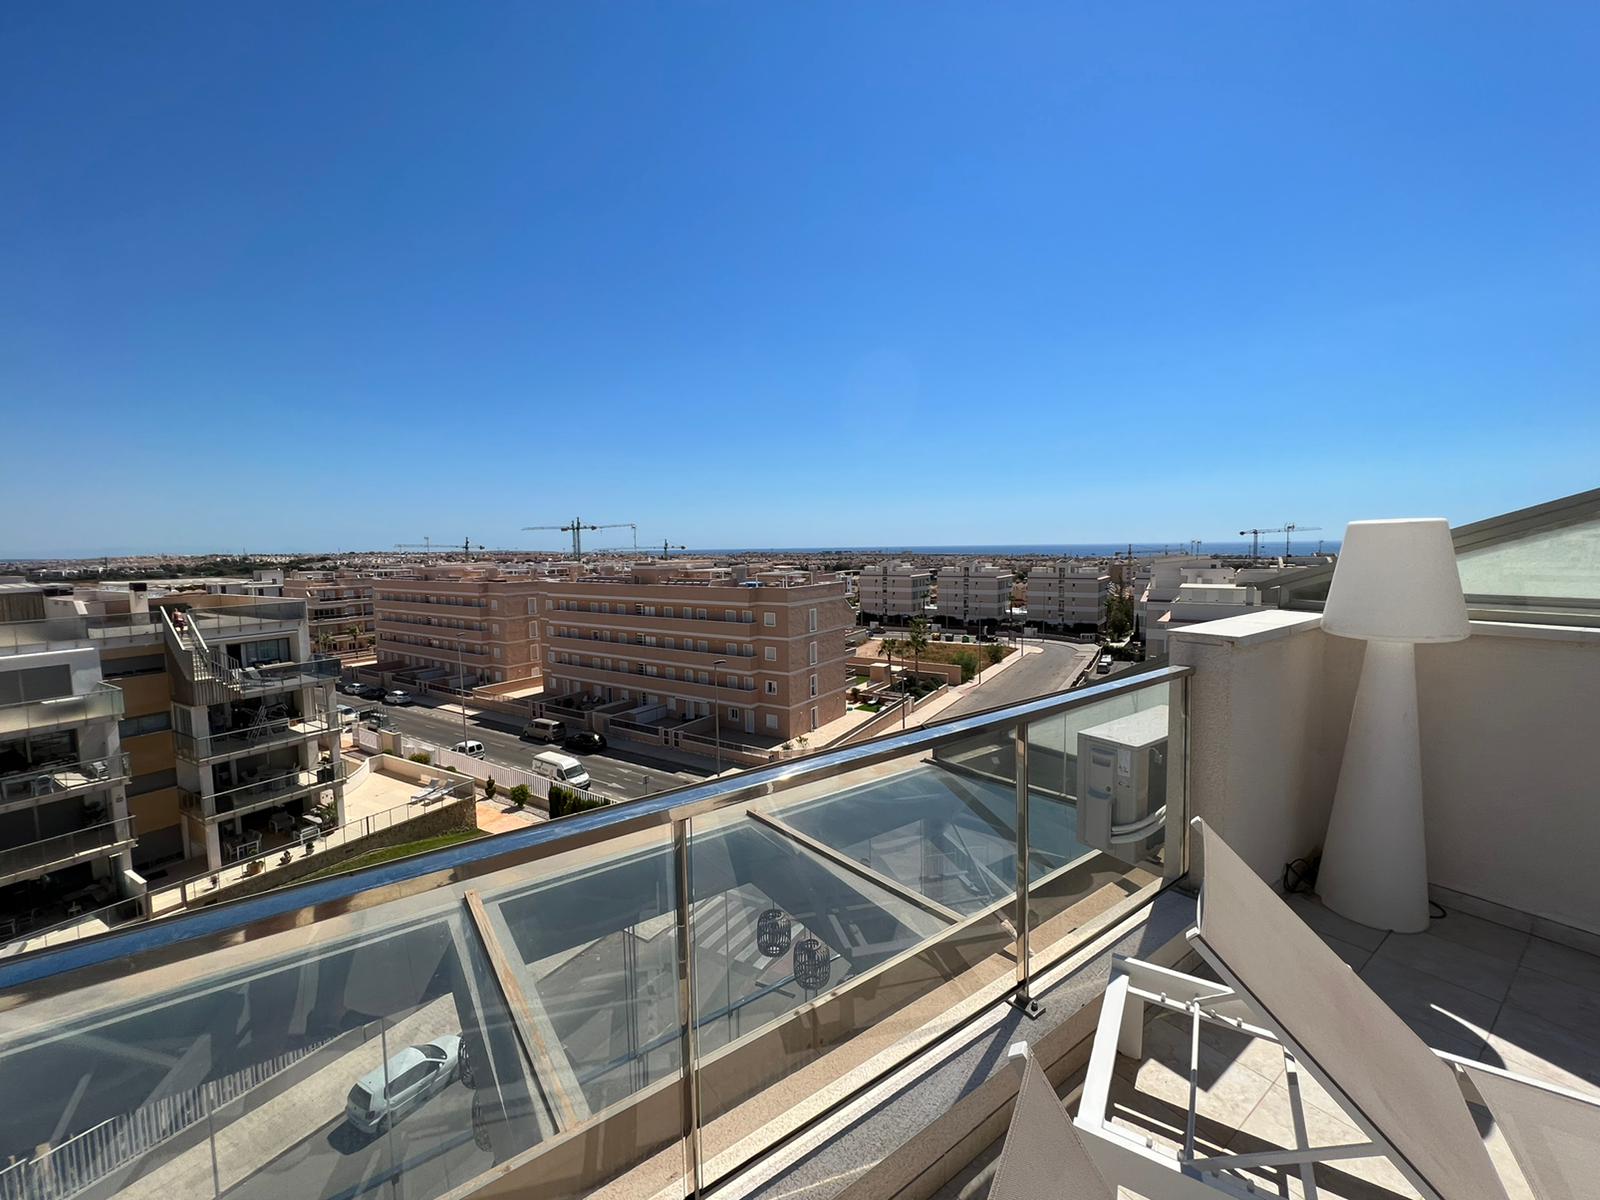 LUXURY PENTHOUSE WITH INCREDIBLE VIEWS LA ZENIA/LOS DOLSES - 3 BEDROOMS, STUNNING!